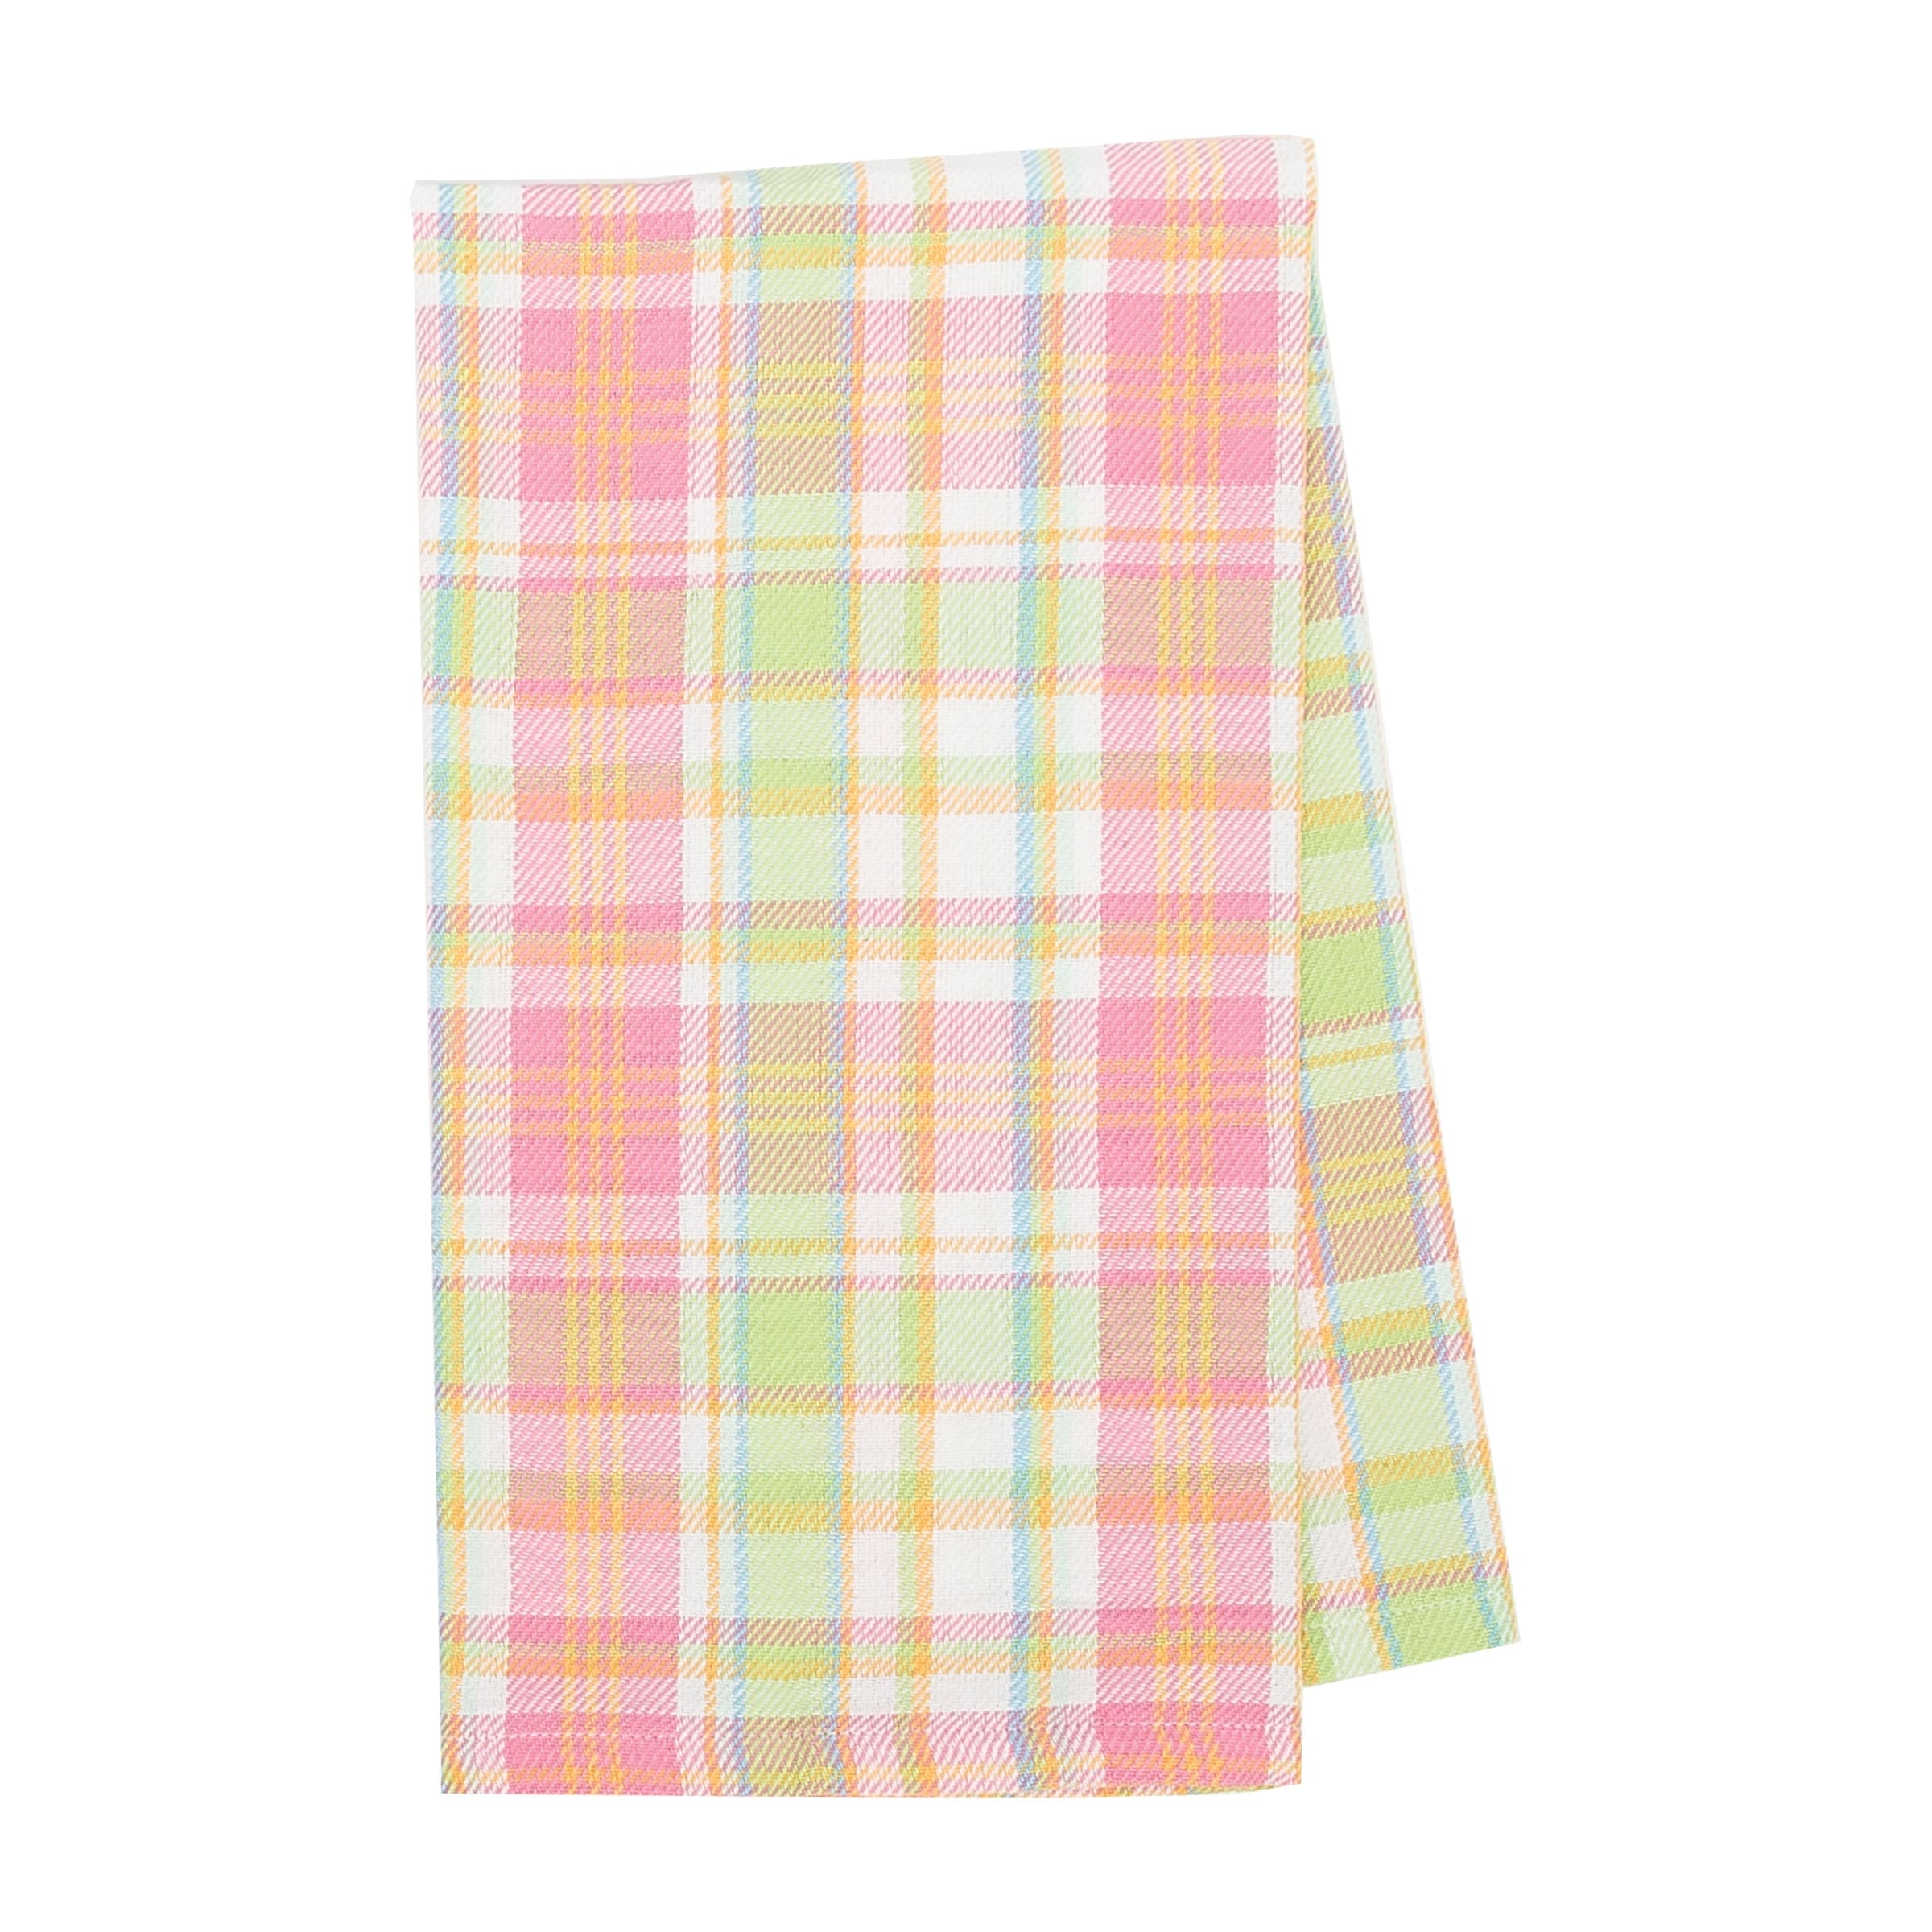 https://ak1.ostkcdn.com/images/products/is/images/direct/bf039e0affcdb75ef0dbb52d709b82c5146e4b50/Palm-Plaid-Woven-Plaid-Woven-Cotton-Easter-Kitchen-Towel.jpg